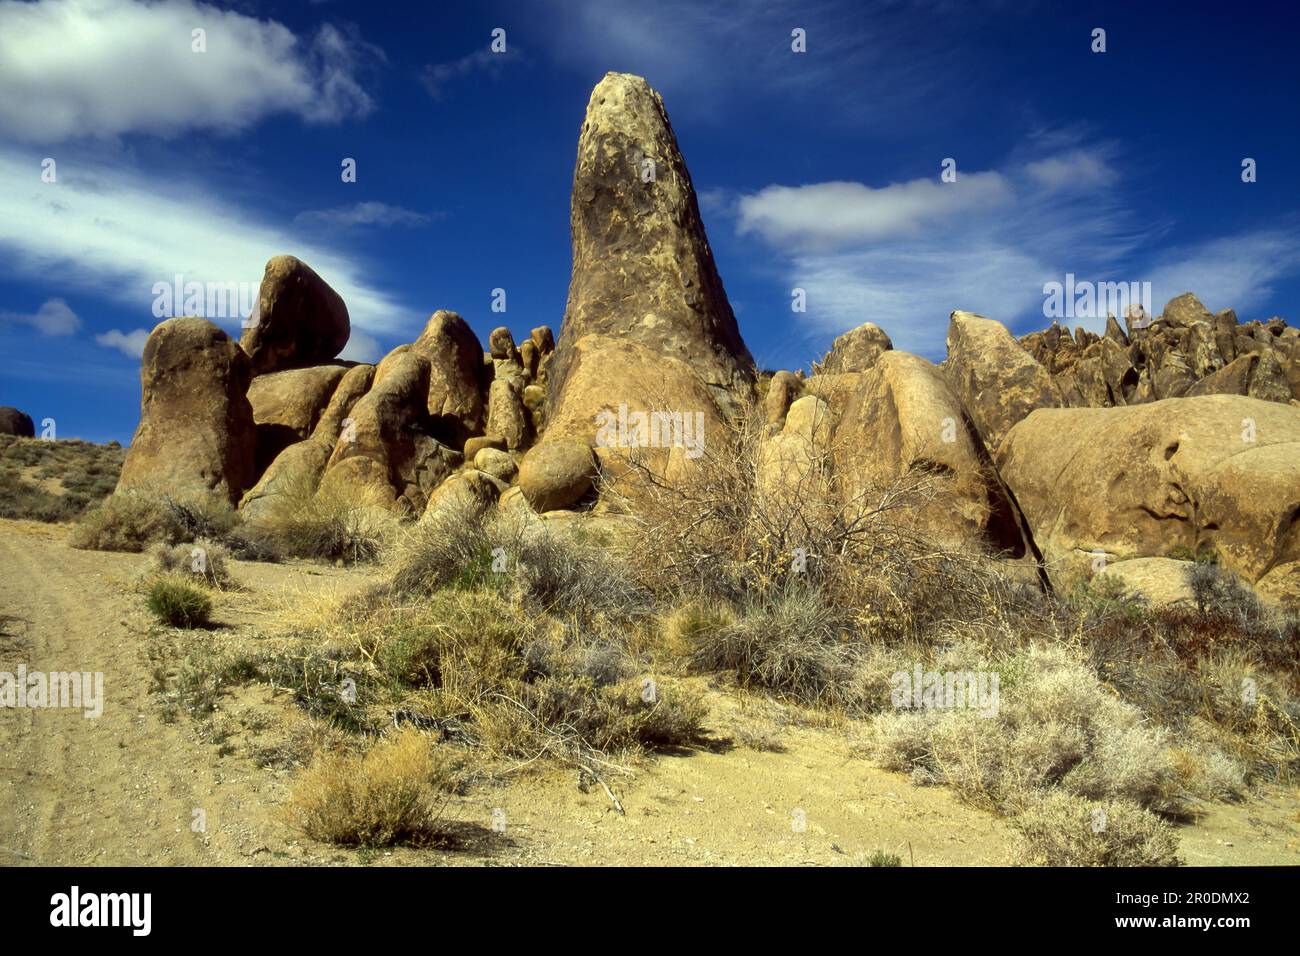 The Alabama Hills hills and rock formations near the eastern slope of the Sierra Nevada in the Owens Valley, west of Lone Pine in Inyo County, Califor Stock Photo